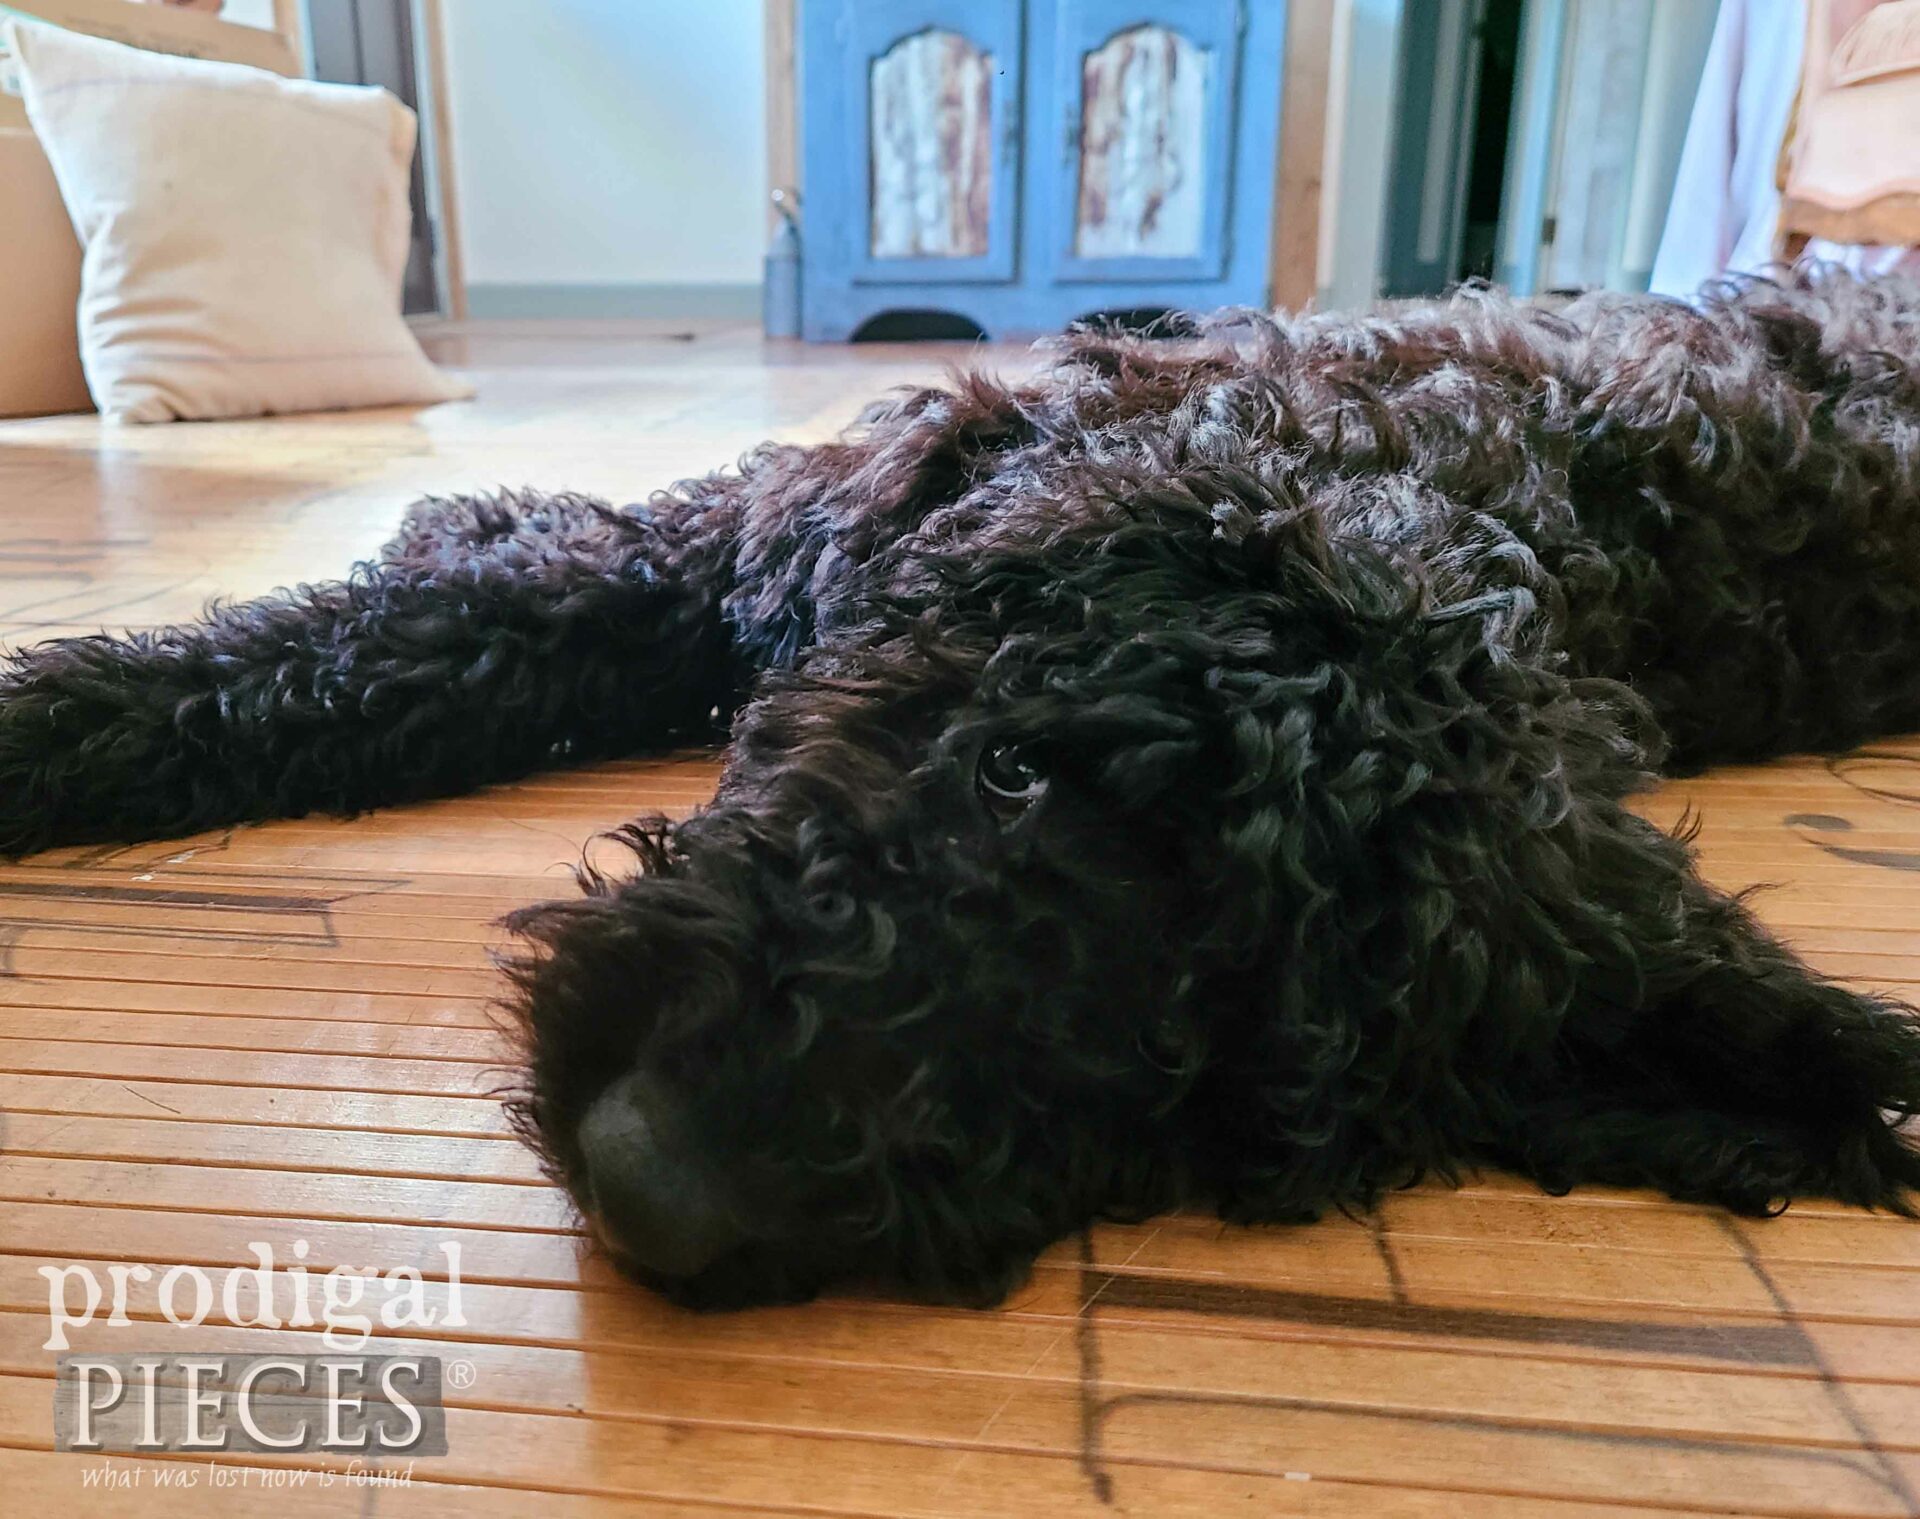 Chillaxin' Black Goldendoodle Puppy in New Home of Larissa of Prodigal Pieces | prodigalpieces.com #prodigalpieces #puppy #doods #doodle #dog